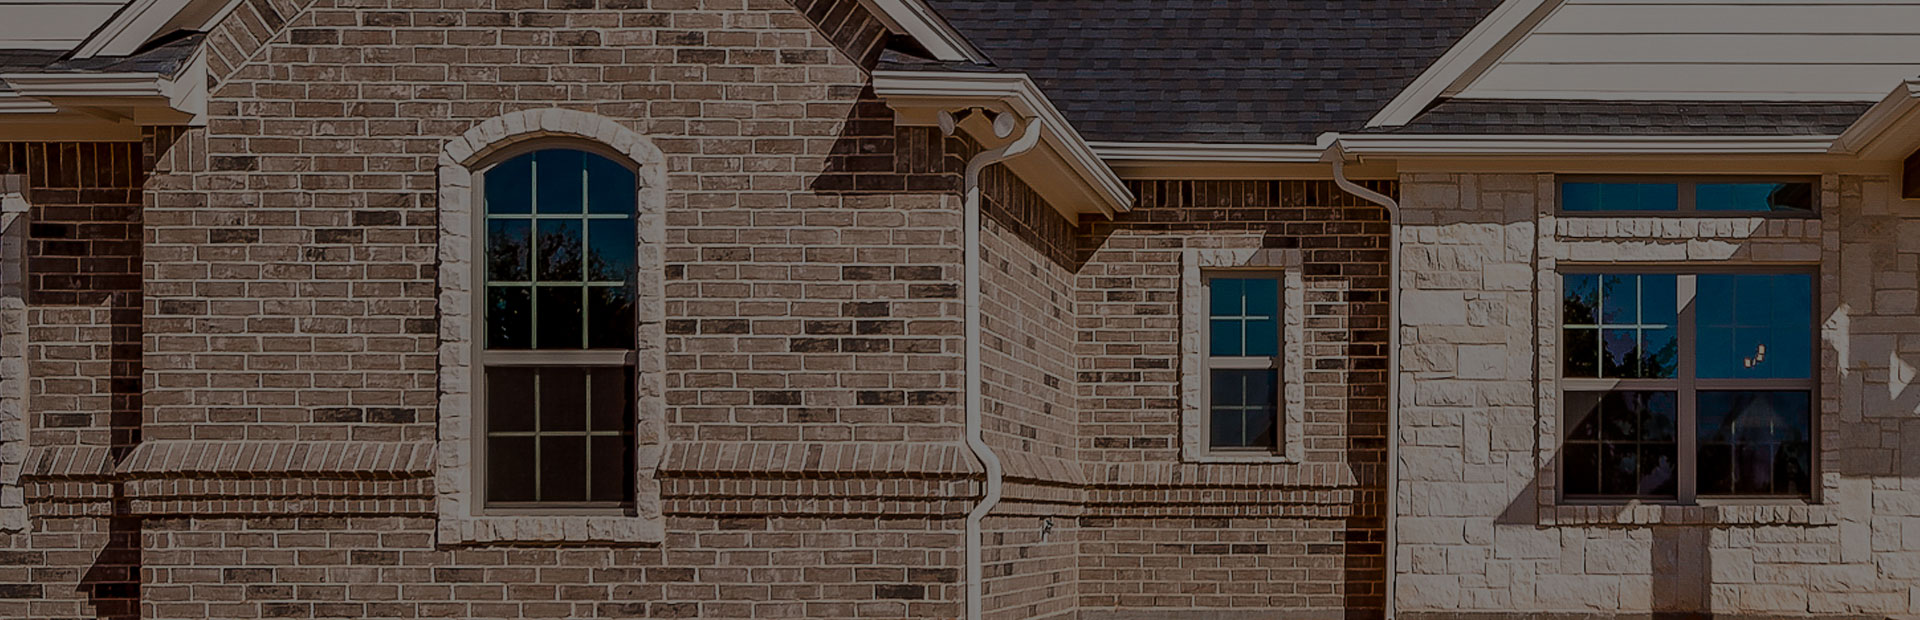 Gutters and Downspouts - Dallas Fort Worth